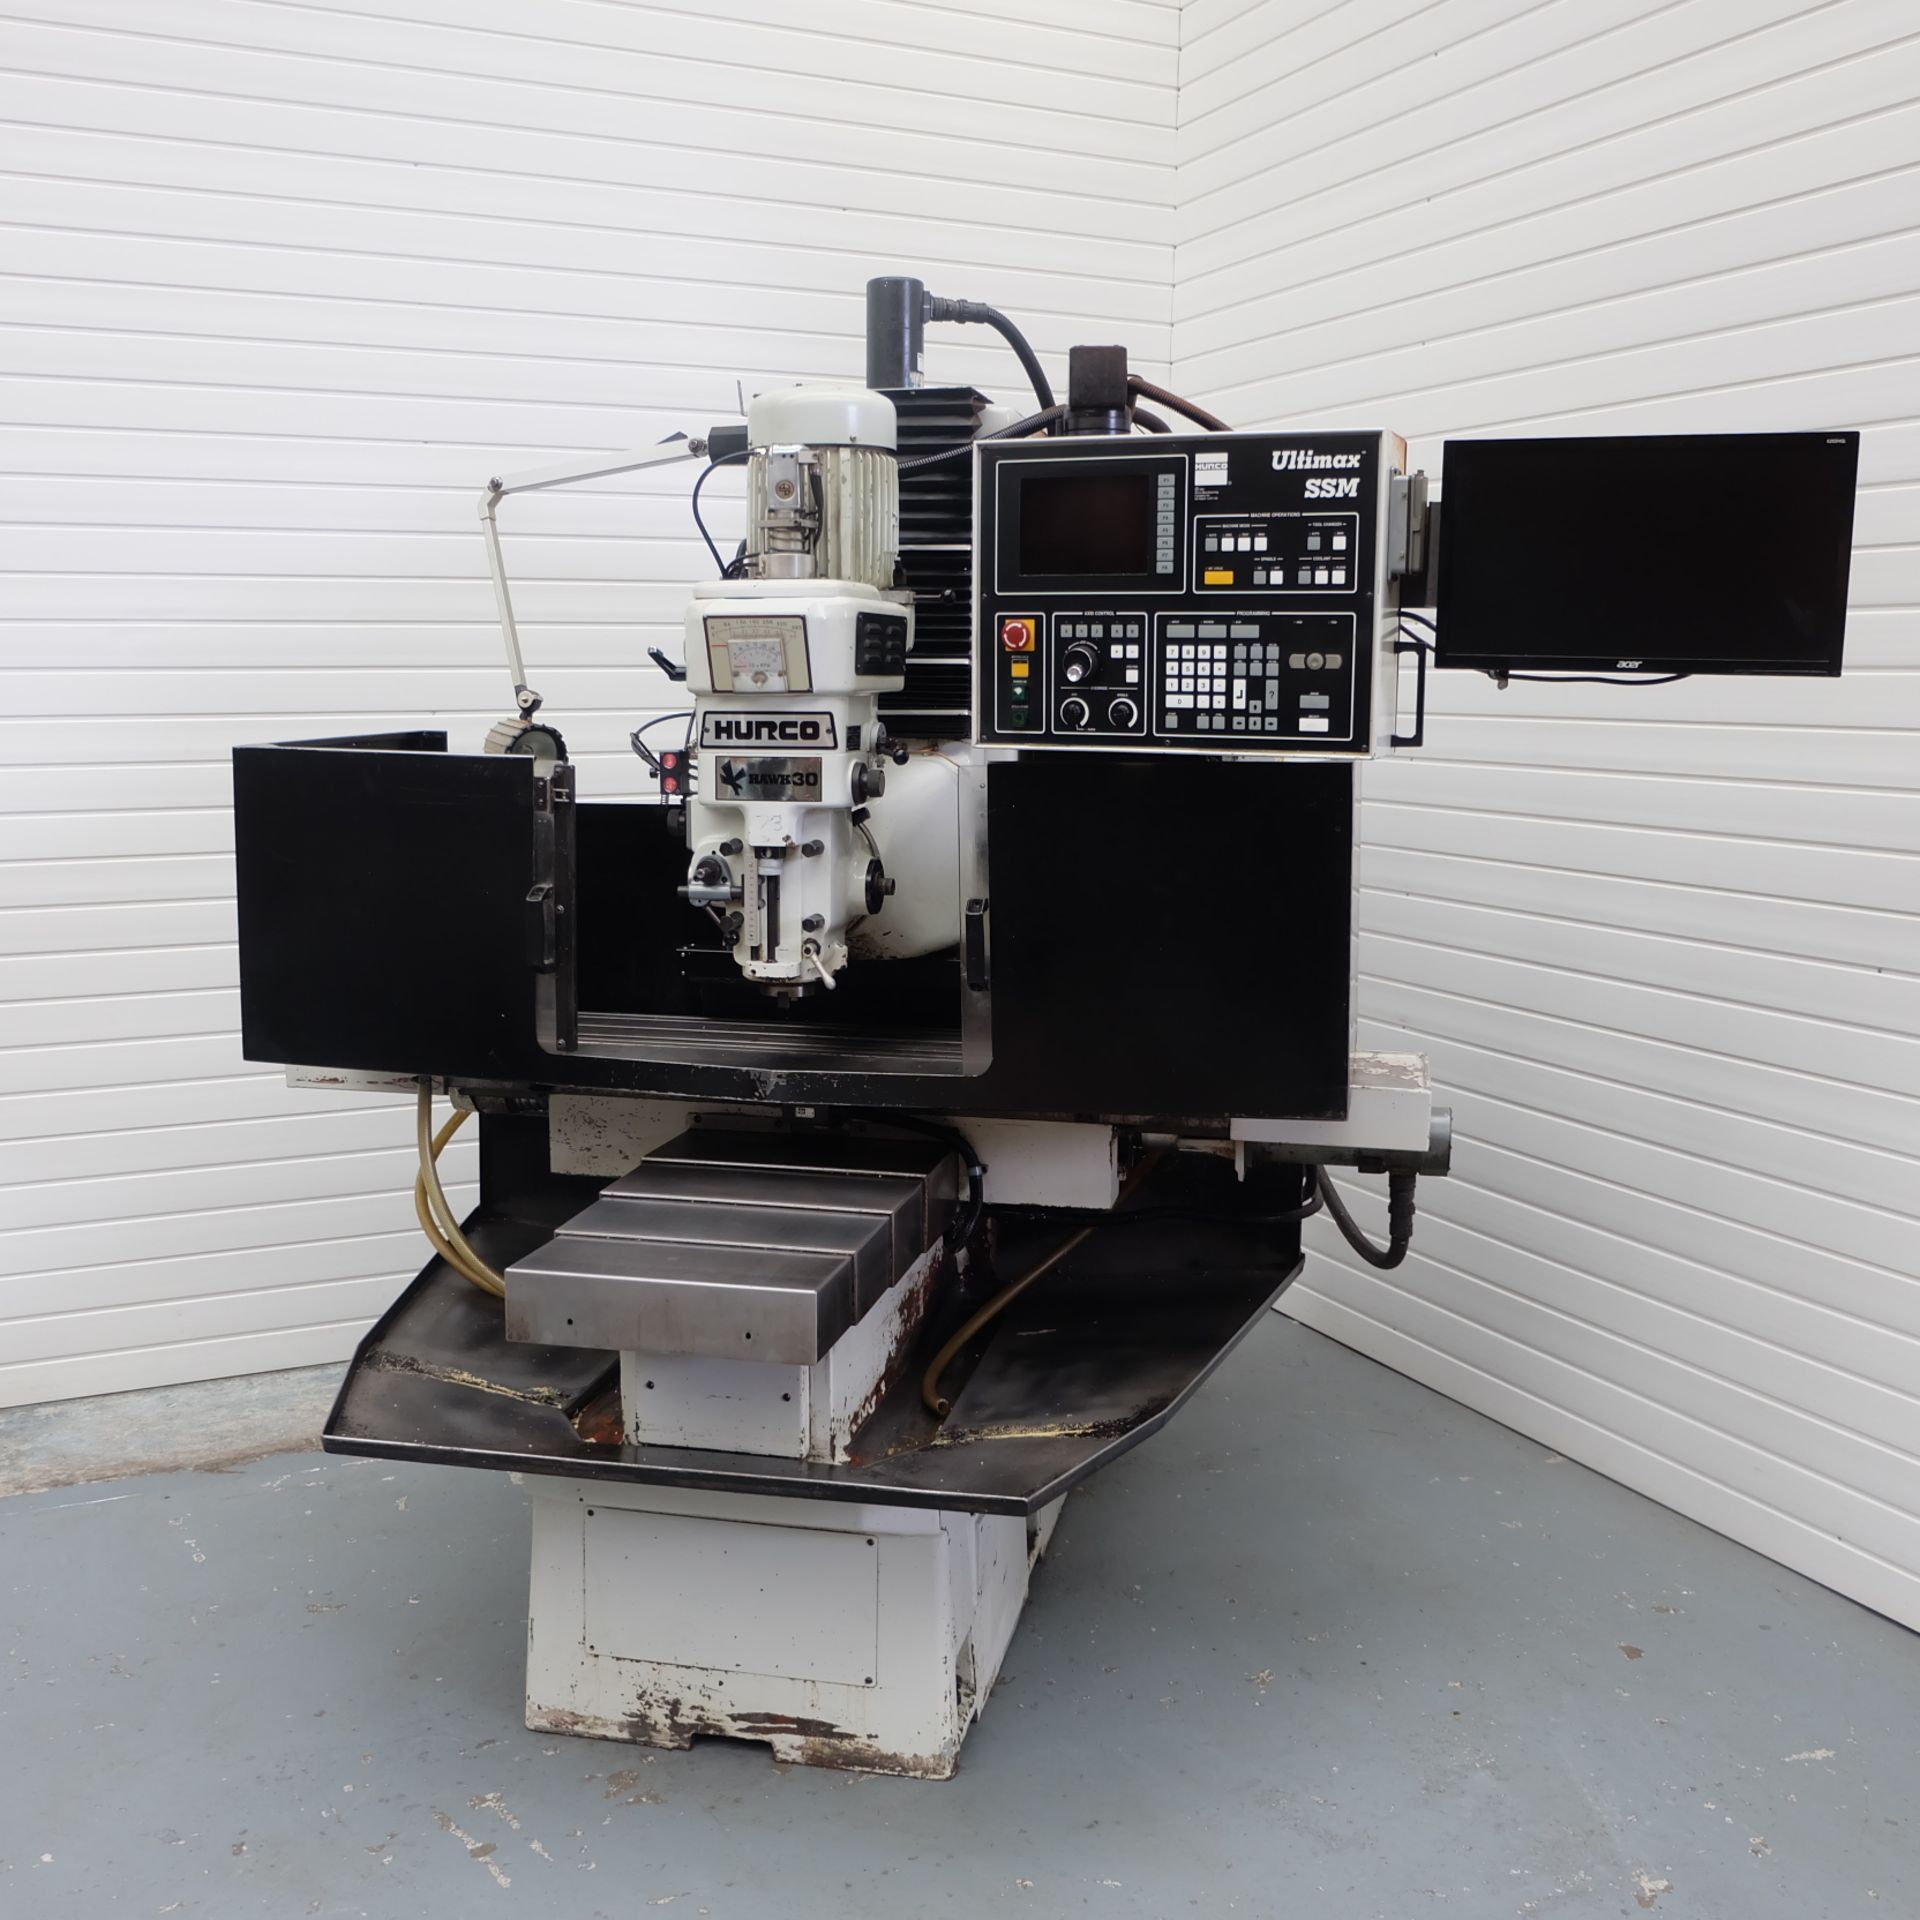 Hurco Hawk 30 CNC 3 Axis Vertical CNC Mill With Ultimax 55m Control. - Image 2 of 15